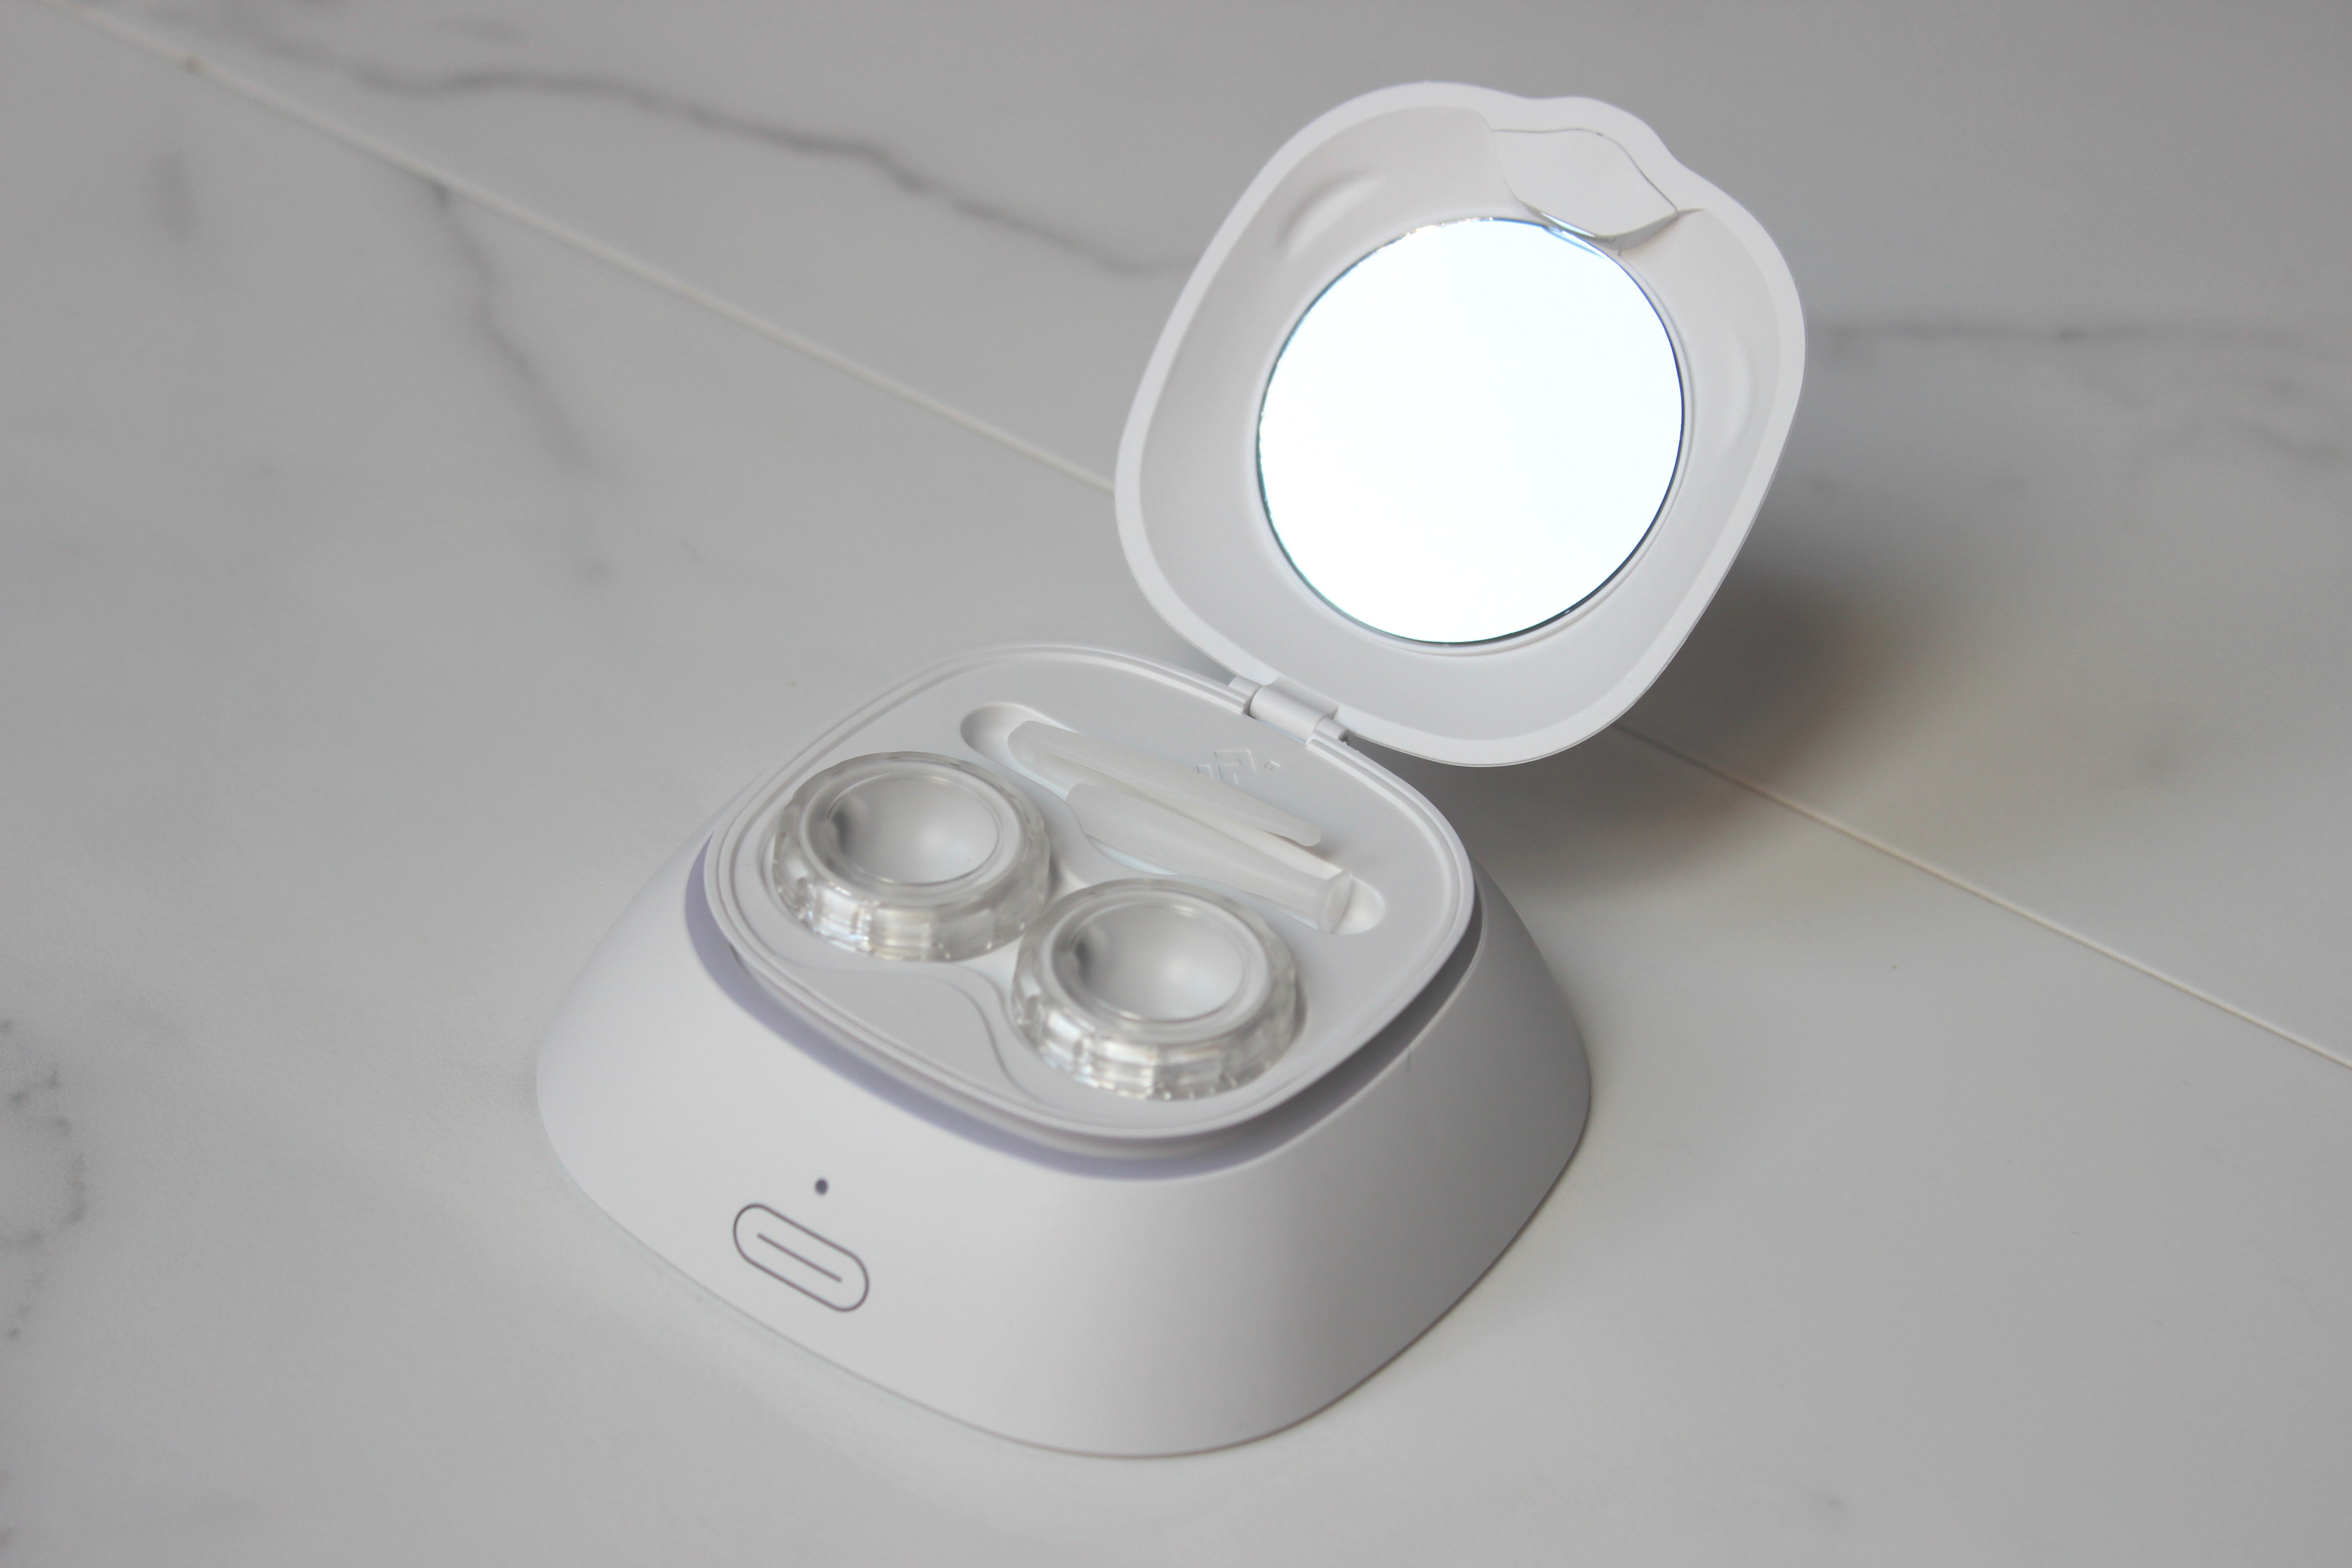 Ultrasonic Contact Lens Cleaning Unit